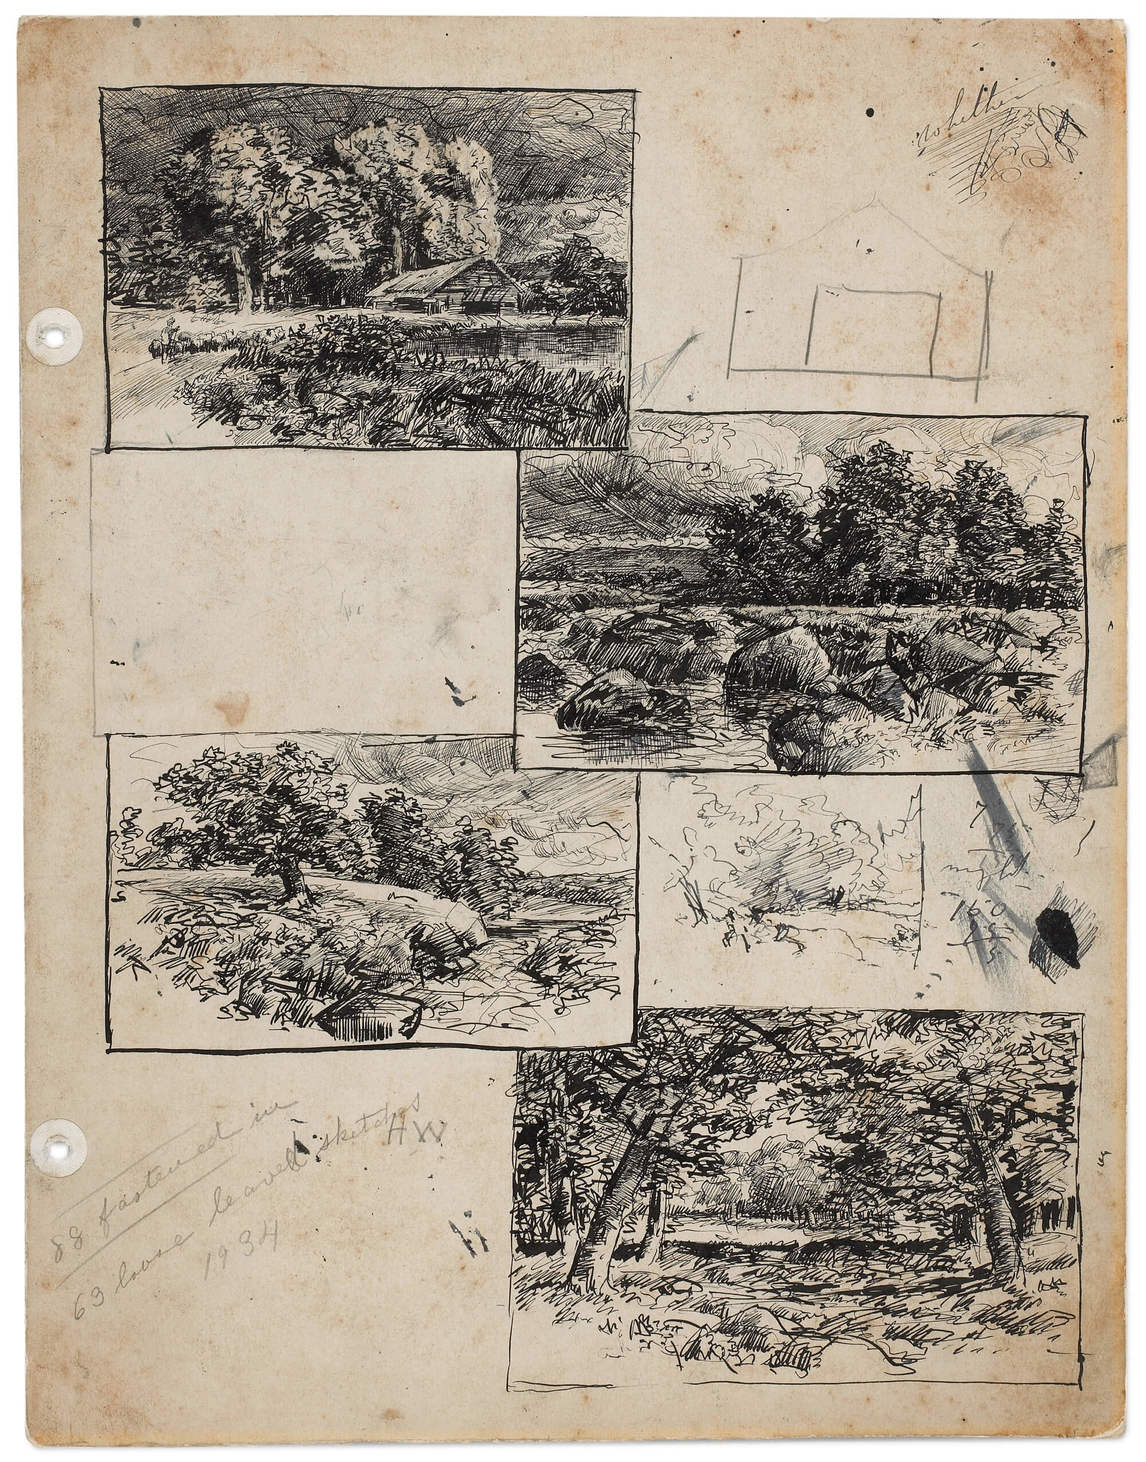 Homer Watson, landscape drawings and a preliminary outline of a building, early 1880s